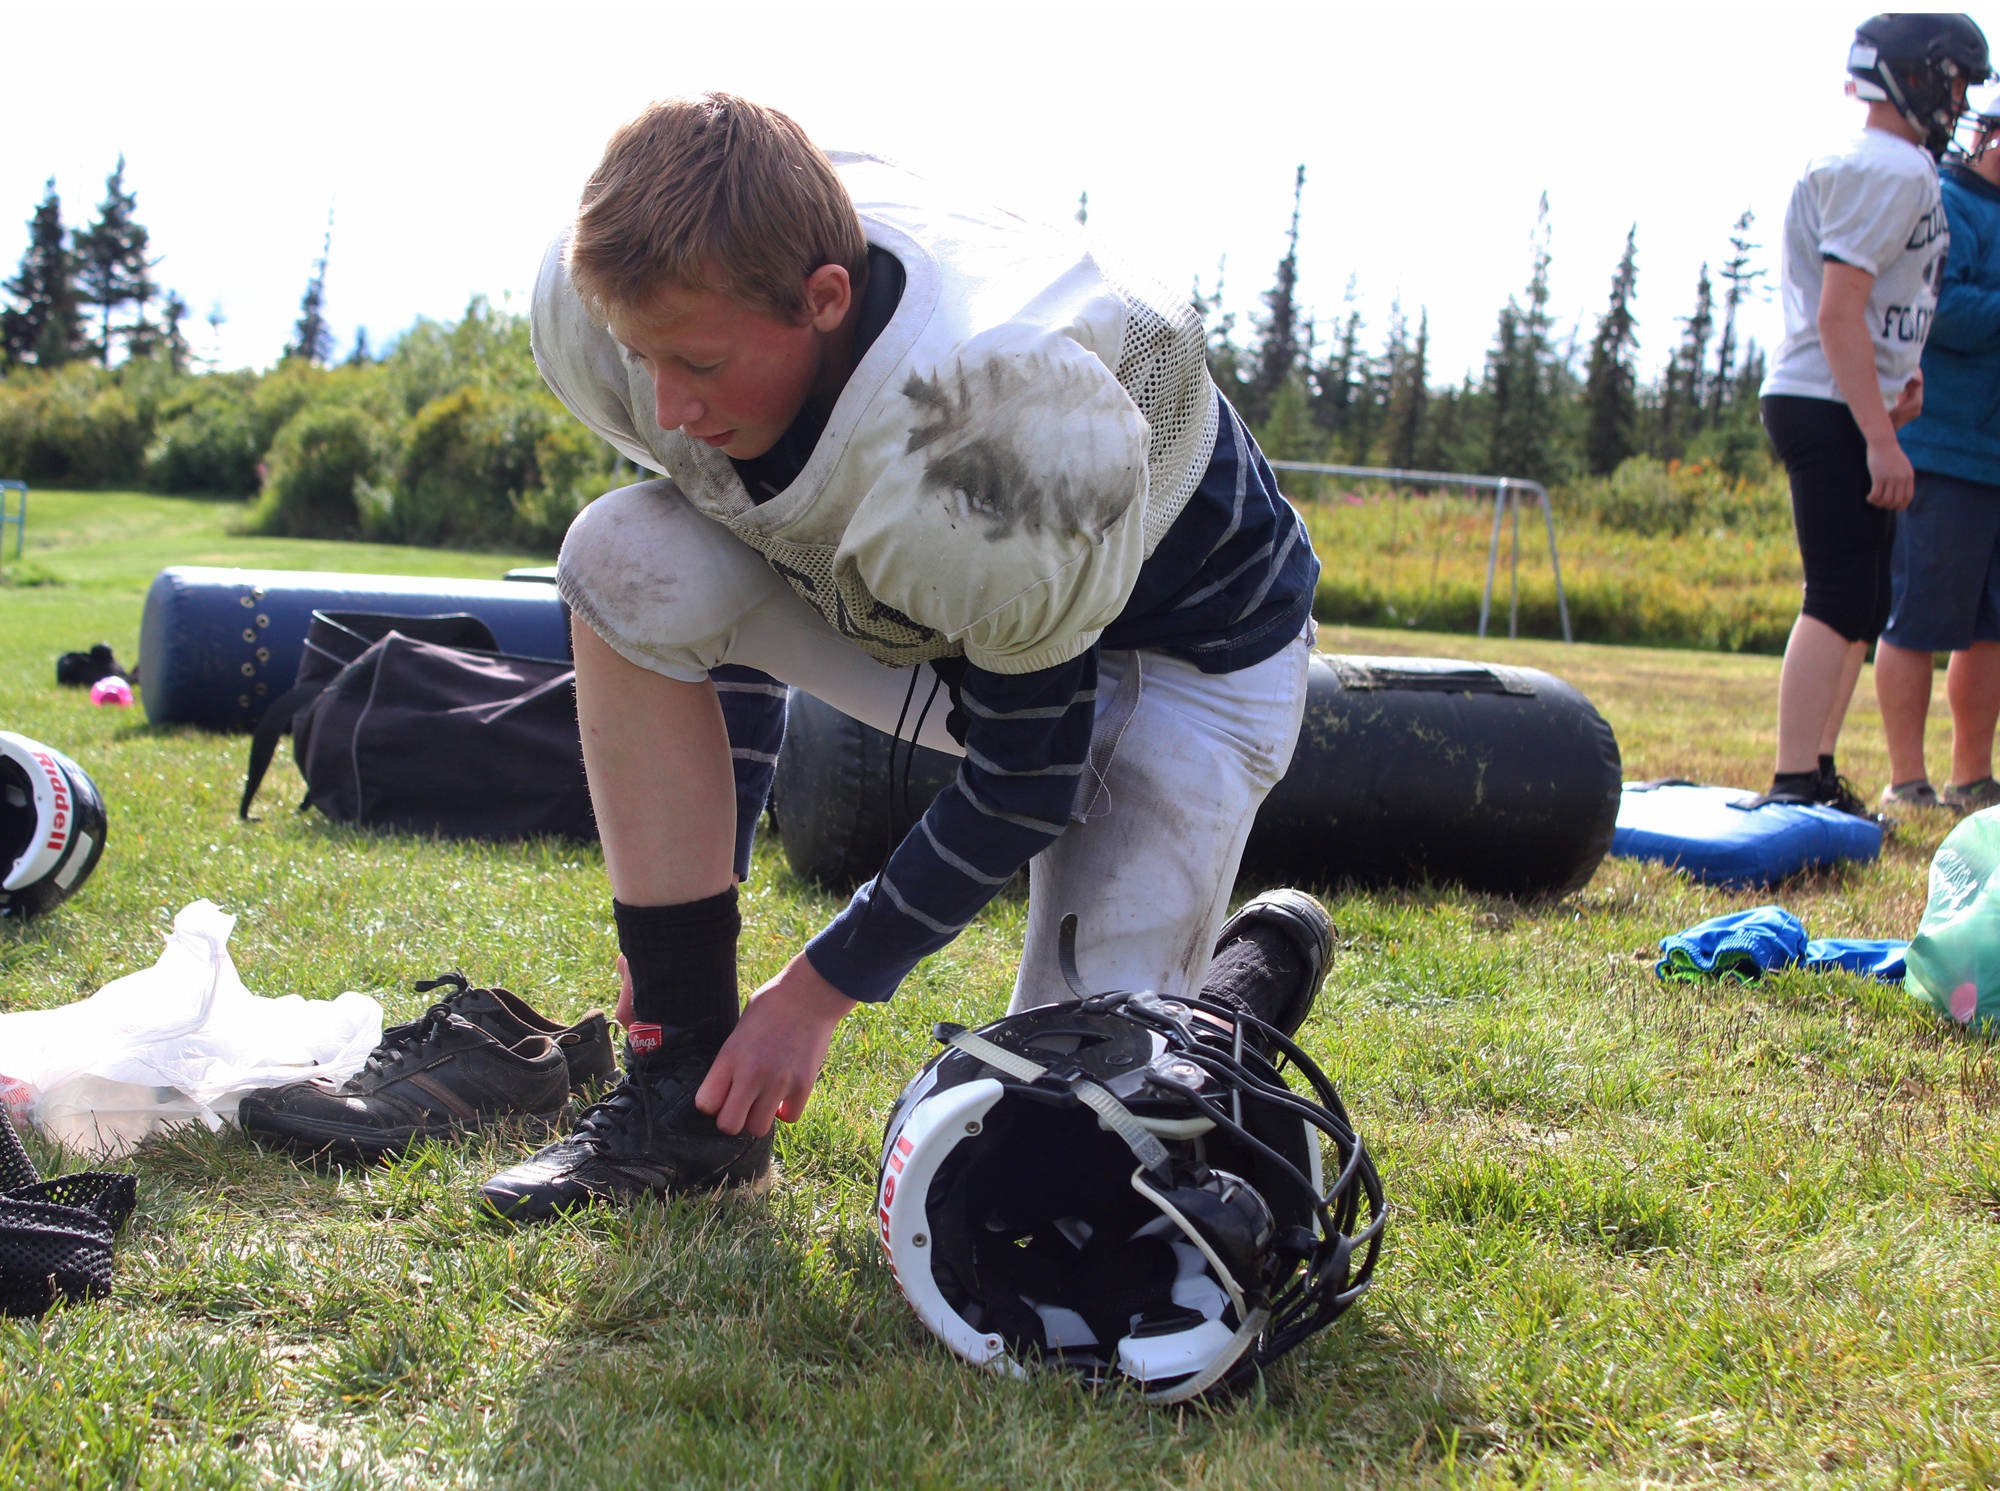 Foma Reutov, a freshman, ties up his shoes before a Cougars football practice Friday, Sept. 1, 2017 at McNeil Canyon Elementary in Fritz Creek, Alaska. The team, usually made up of a mix of students from the Russian Old Believer Villages Voznesenka, Razdolna and Kachemak-Selo, is in its fifth year as a varsity, 11-man program. (Photo by Megan Pacer/Homer News)